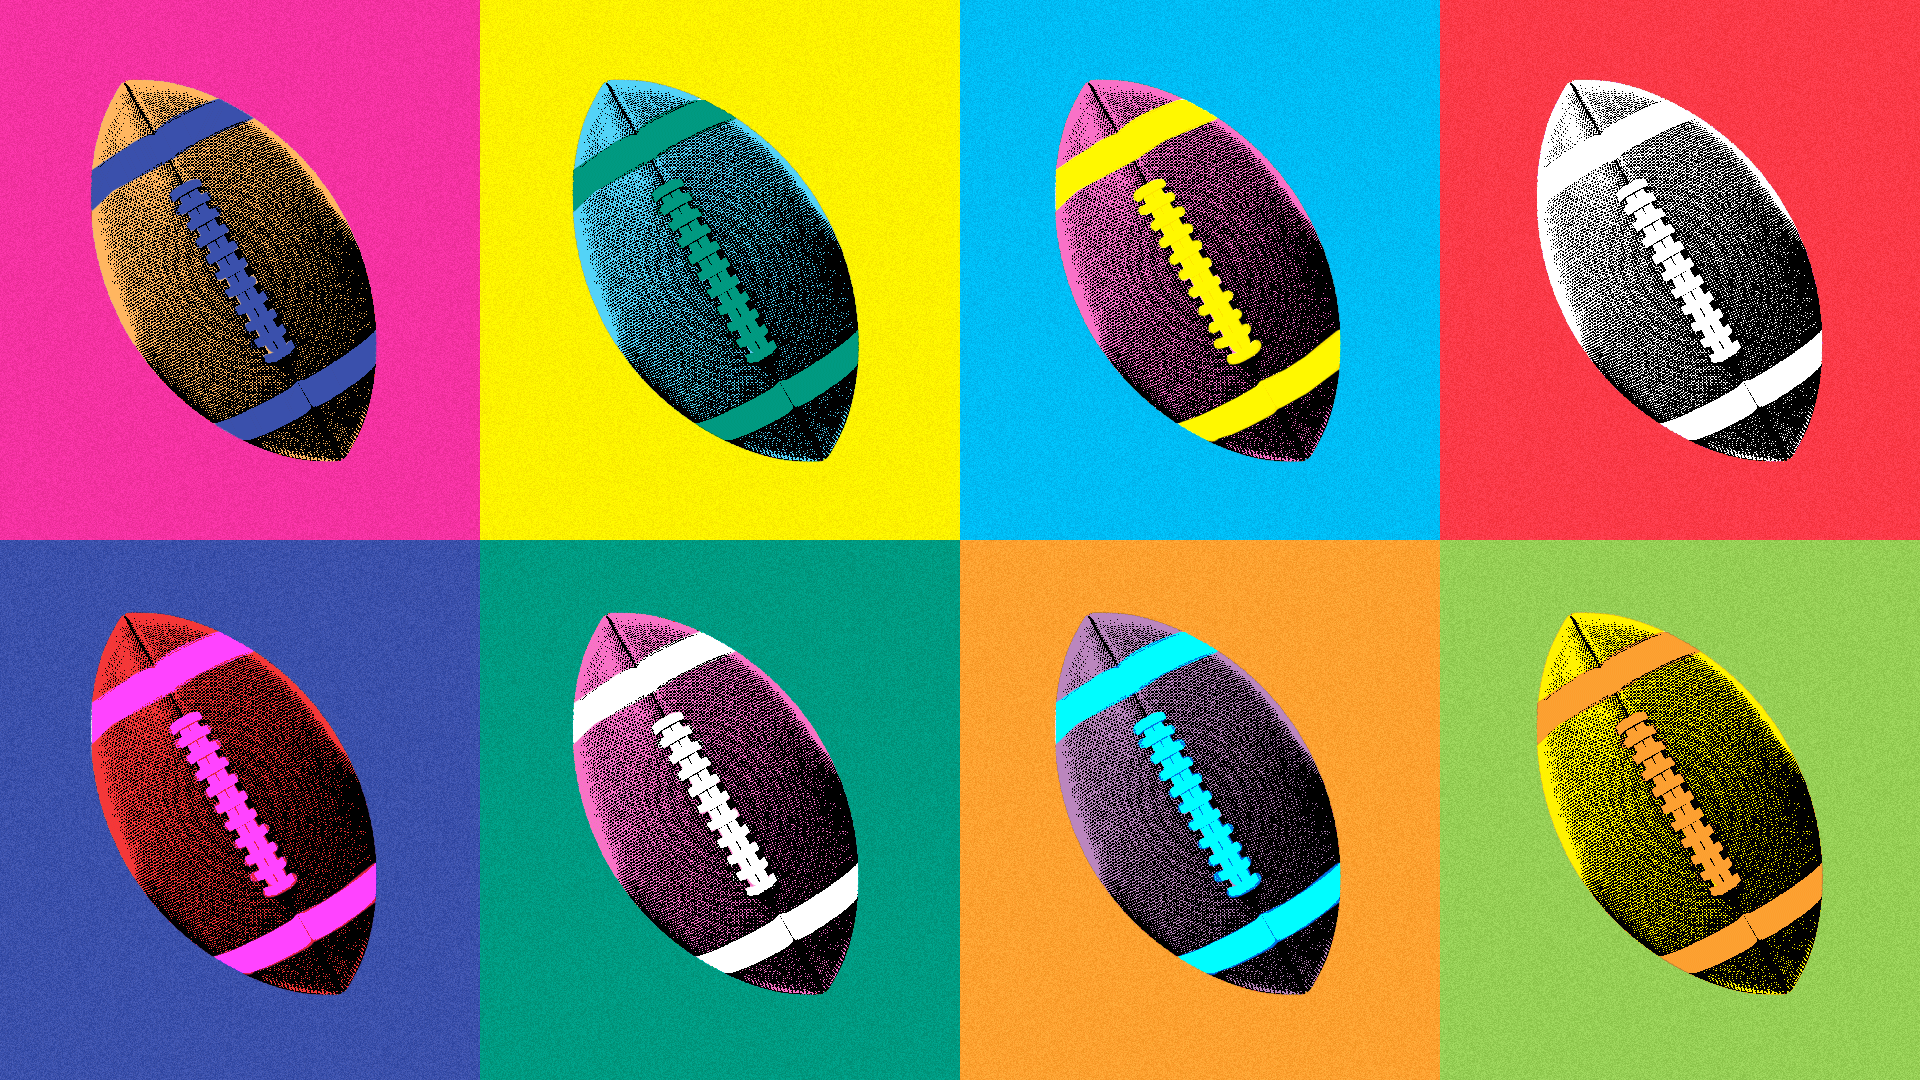 Illustration of eight footballs colorized in various colors and backgrounds, in a Warhol-like style